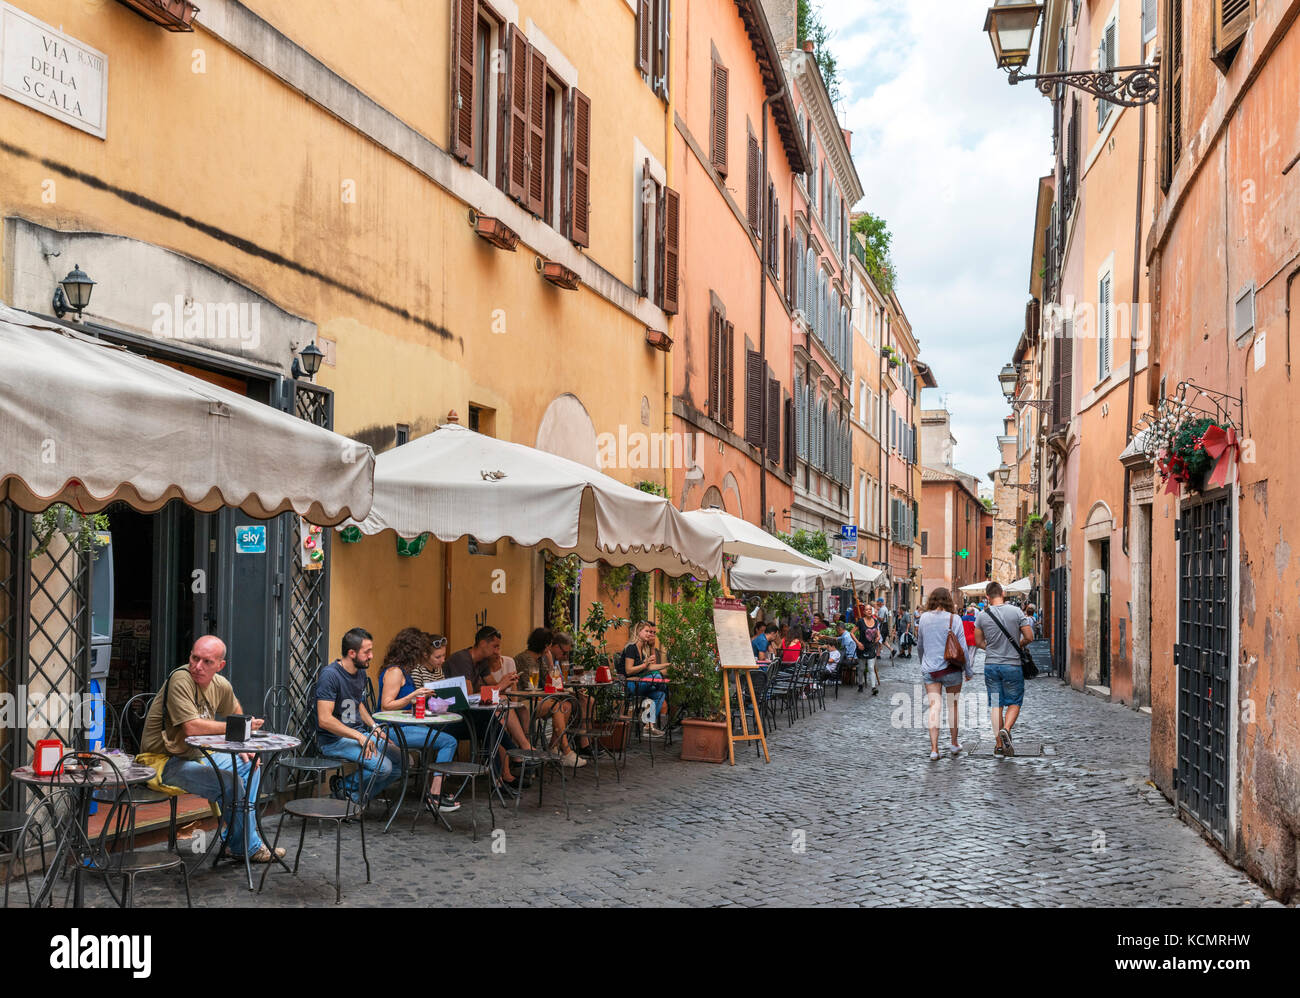 Sidewalk cafes and restaurants on Via della Scala in the Trastevere district, Rome, Italy Stock Photo